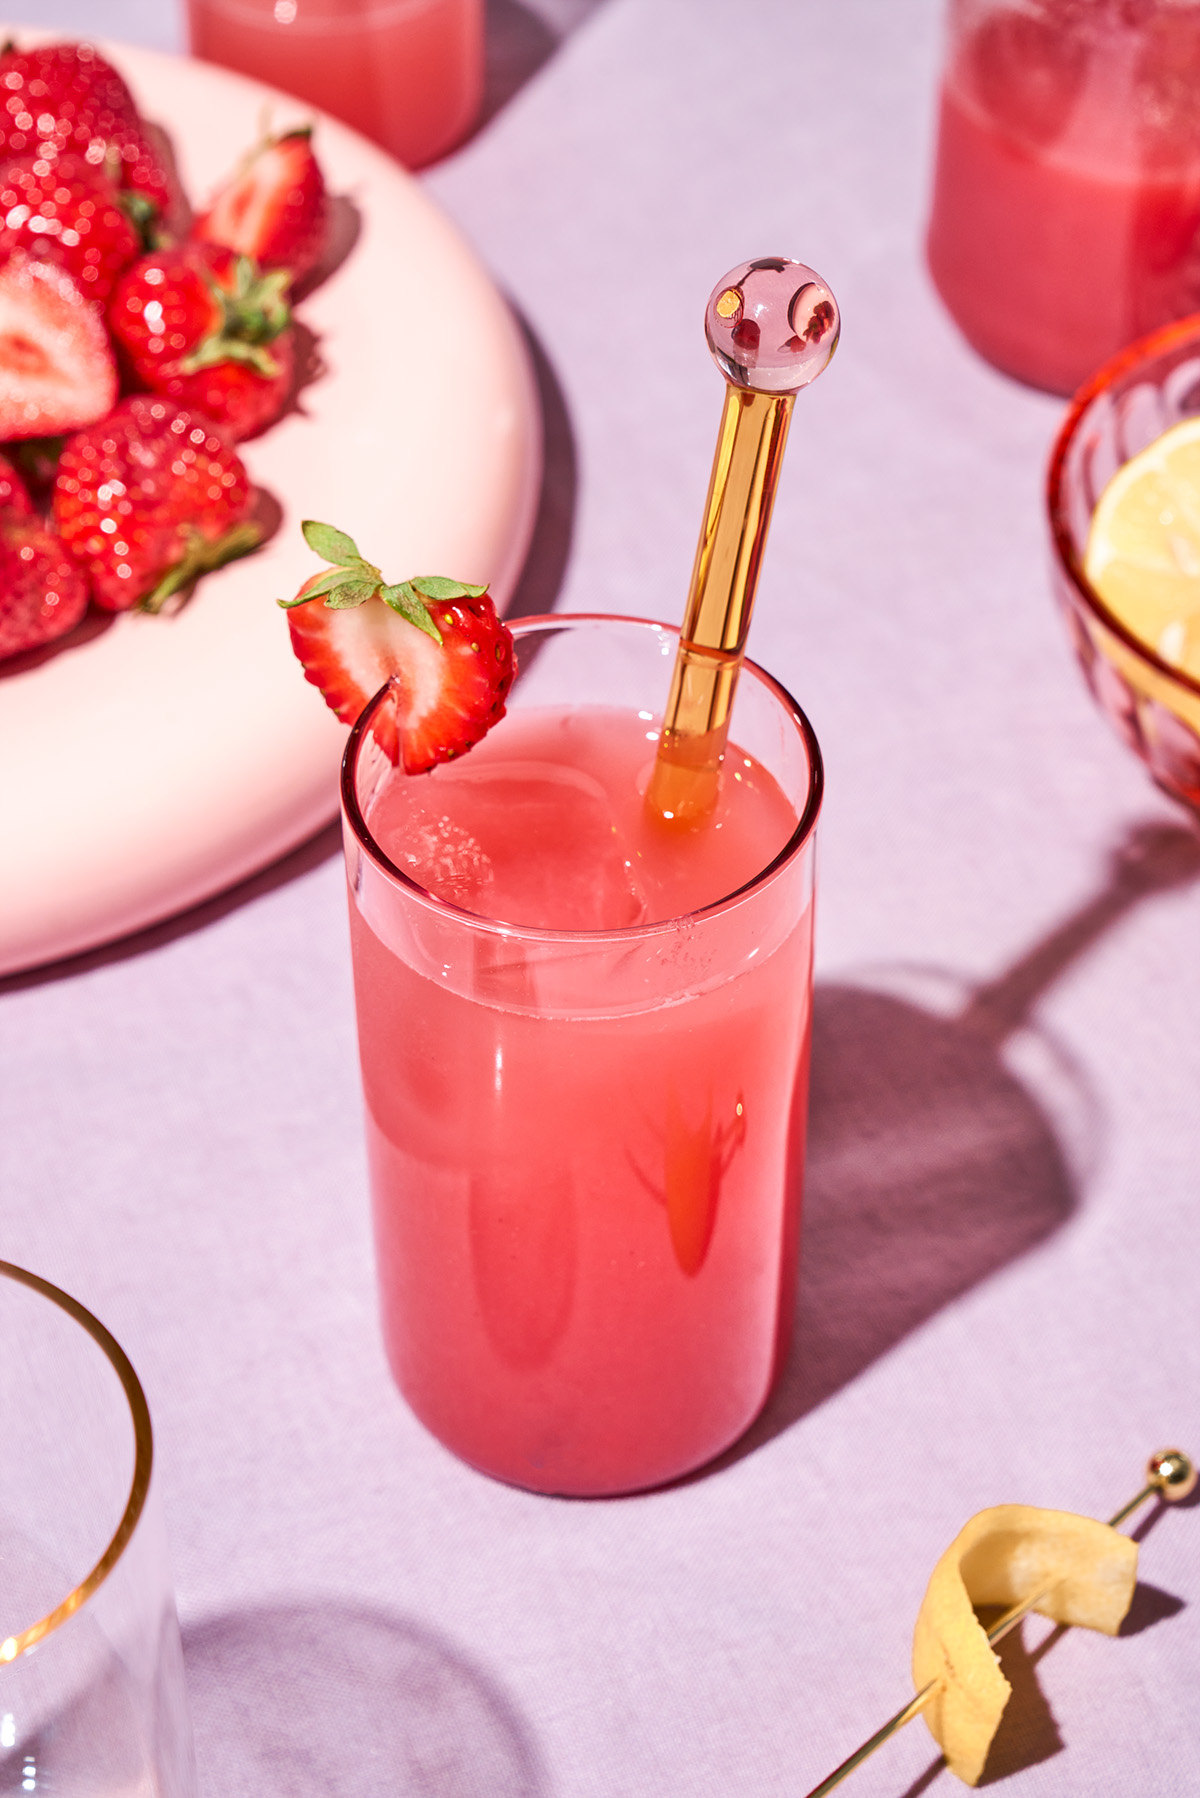 A brightly lit scene with a glass of pink juice and strawberries.